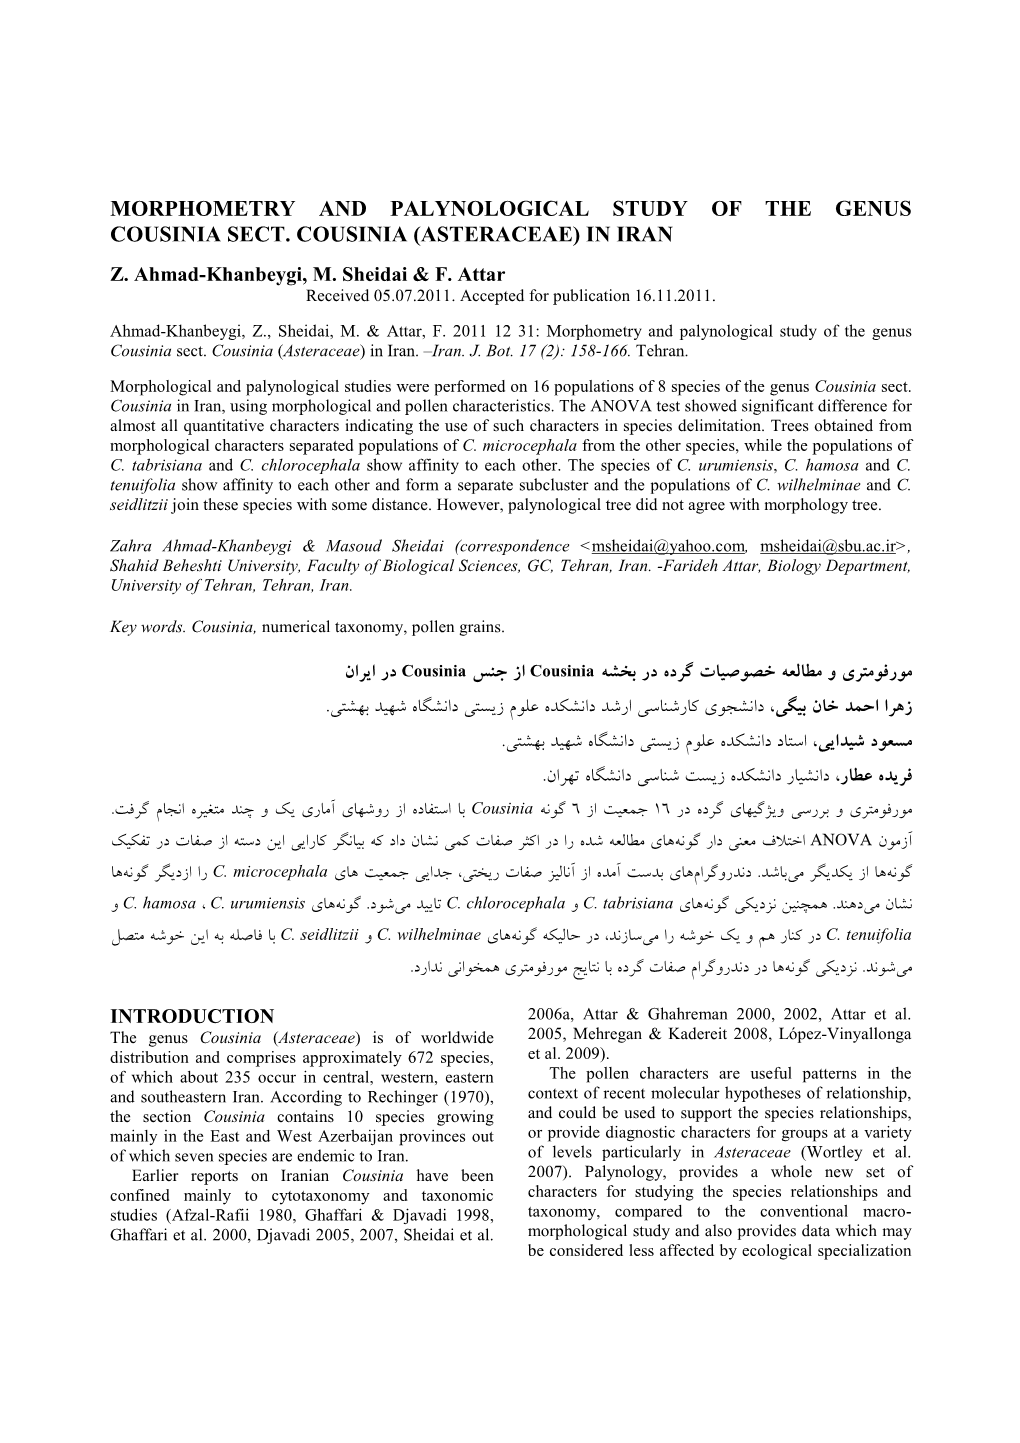 Morphometry and Palynological Study of the Genus Cousinia Sect. Cousinia (Asteraceae) in Iran